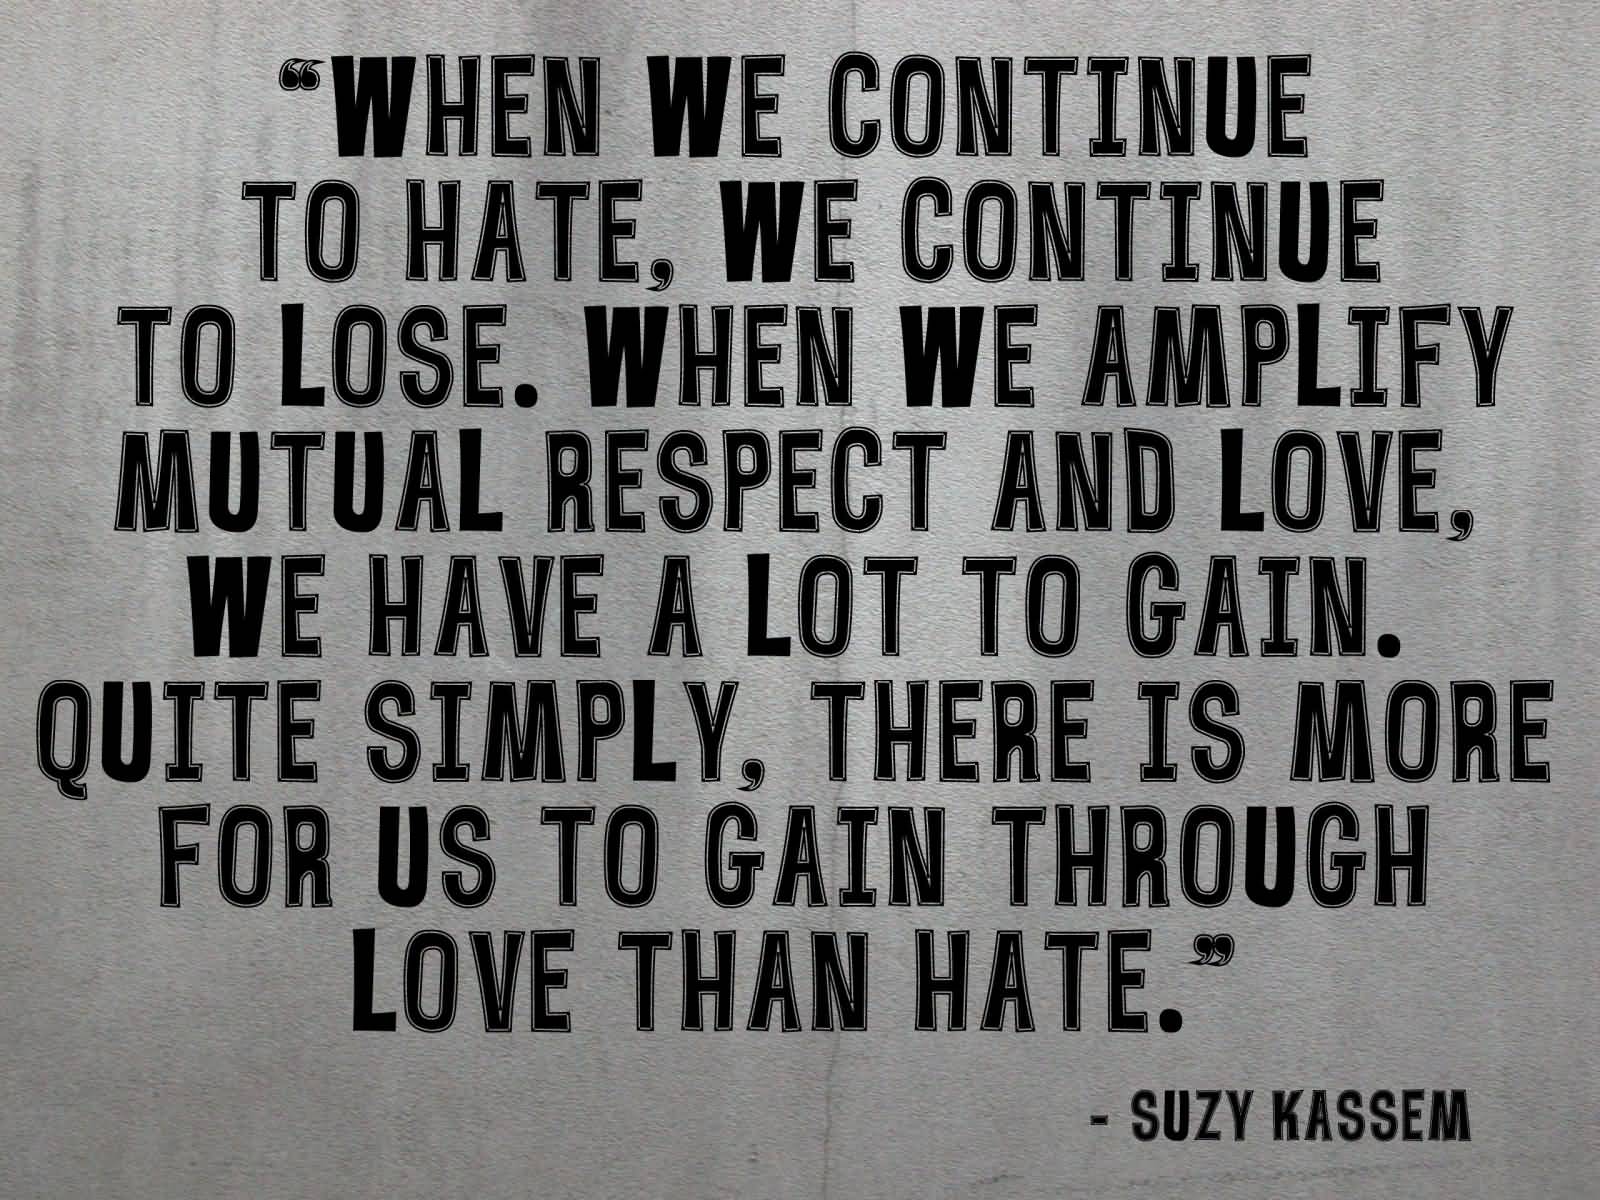 When we continue to hate, we continue to lose. When we amplify mutual respect and love, we have a lot to gain. Quite simply, there is more for us to gain through love than hate. - Suzy Kassem